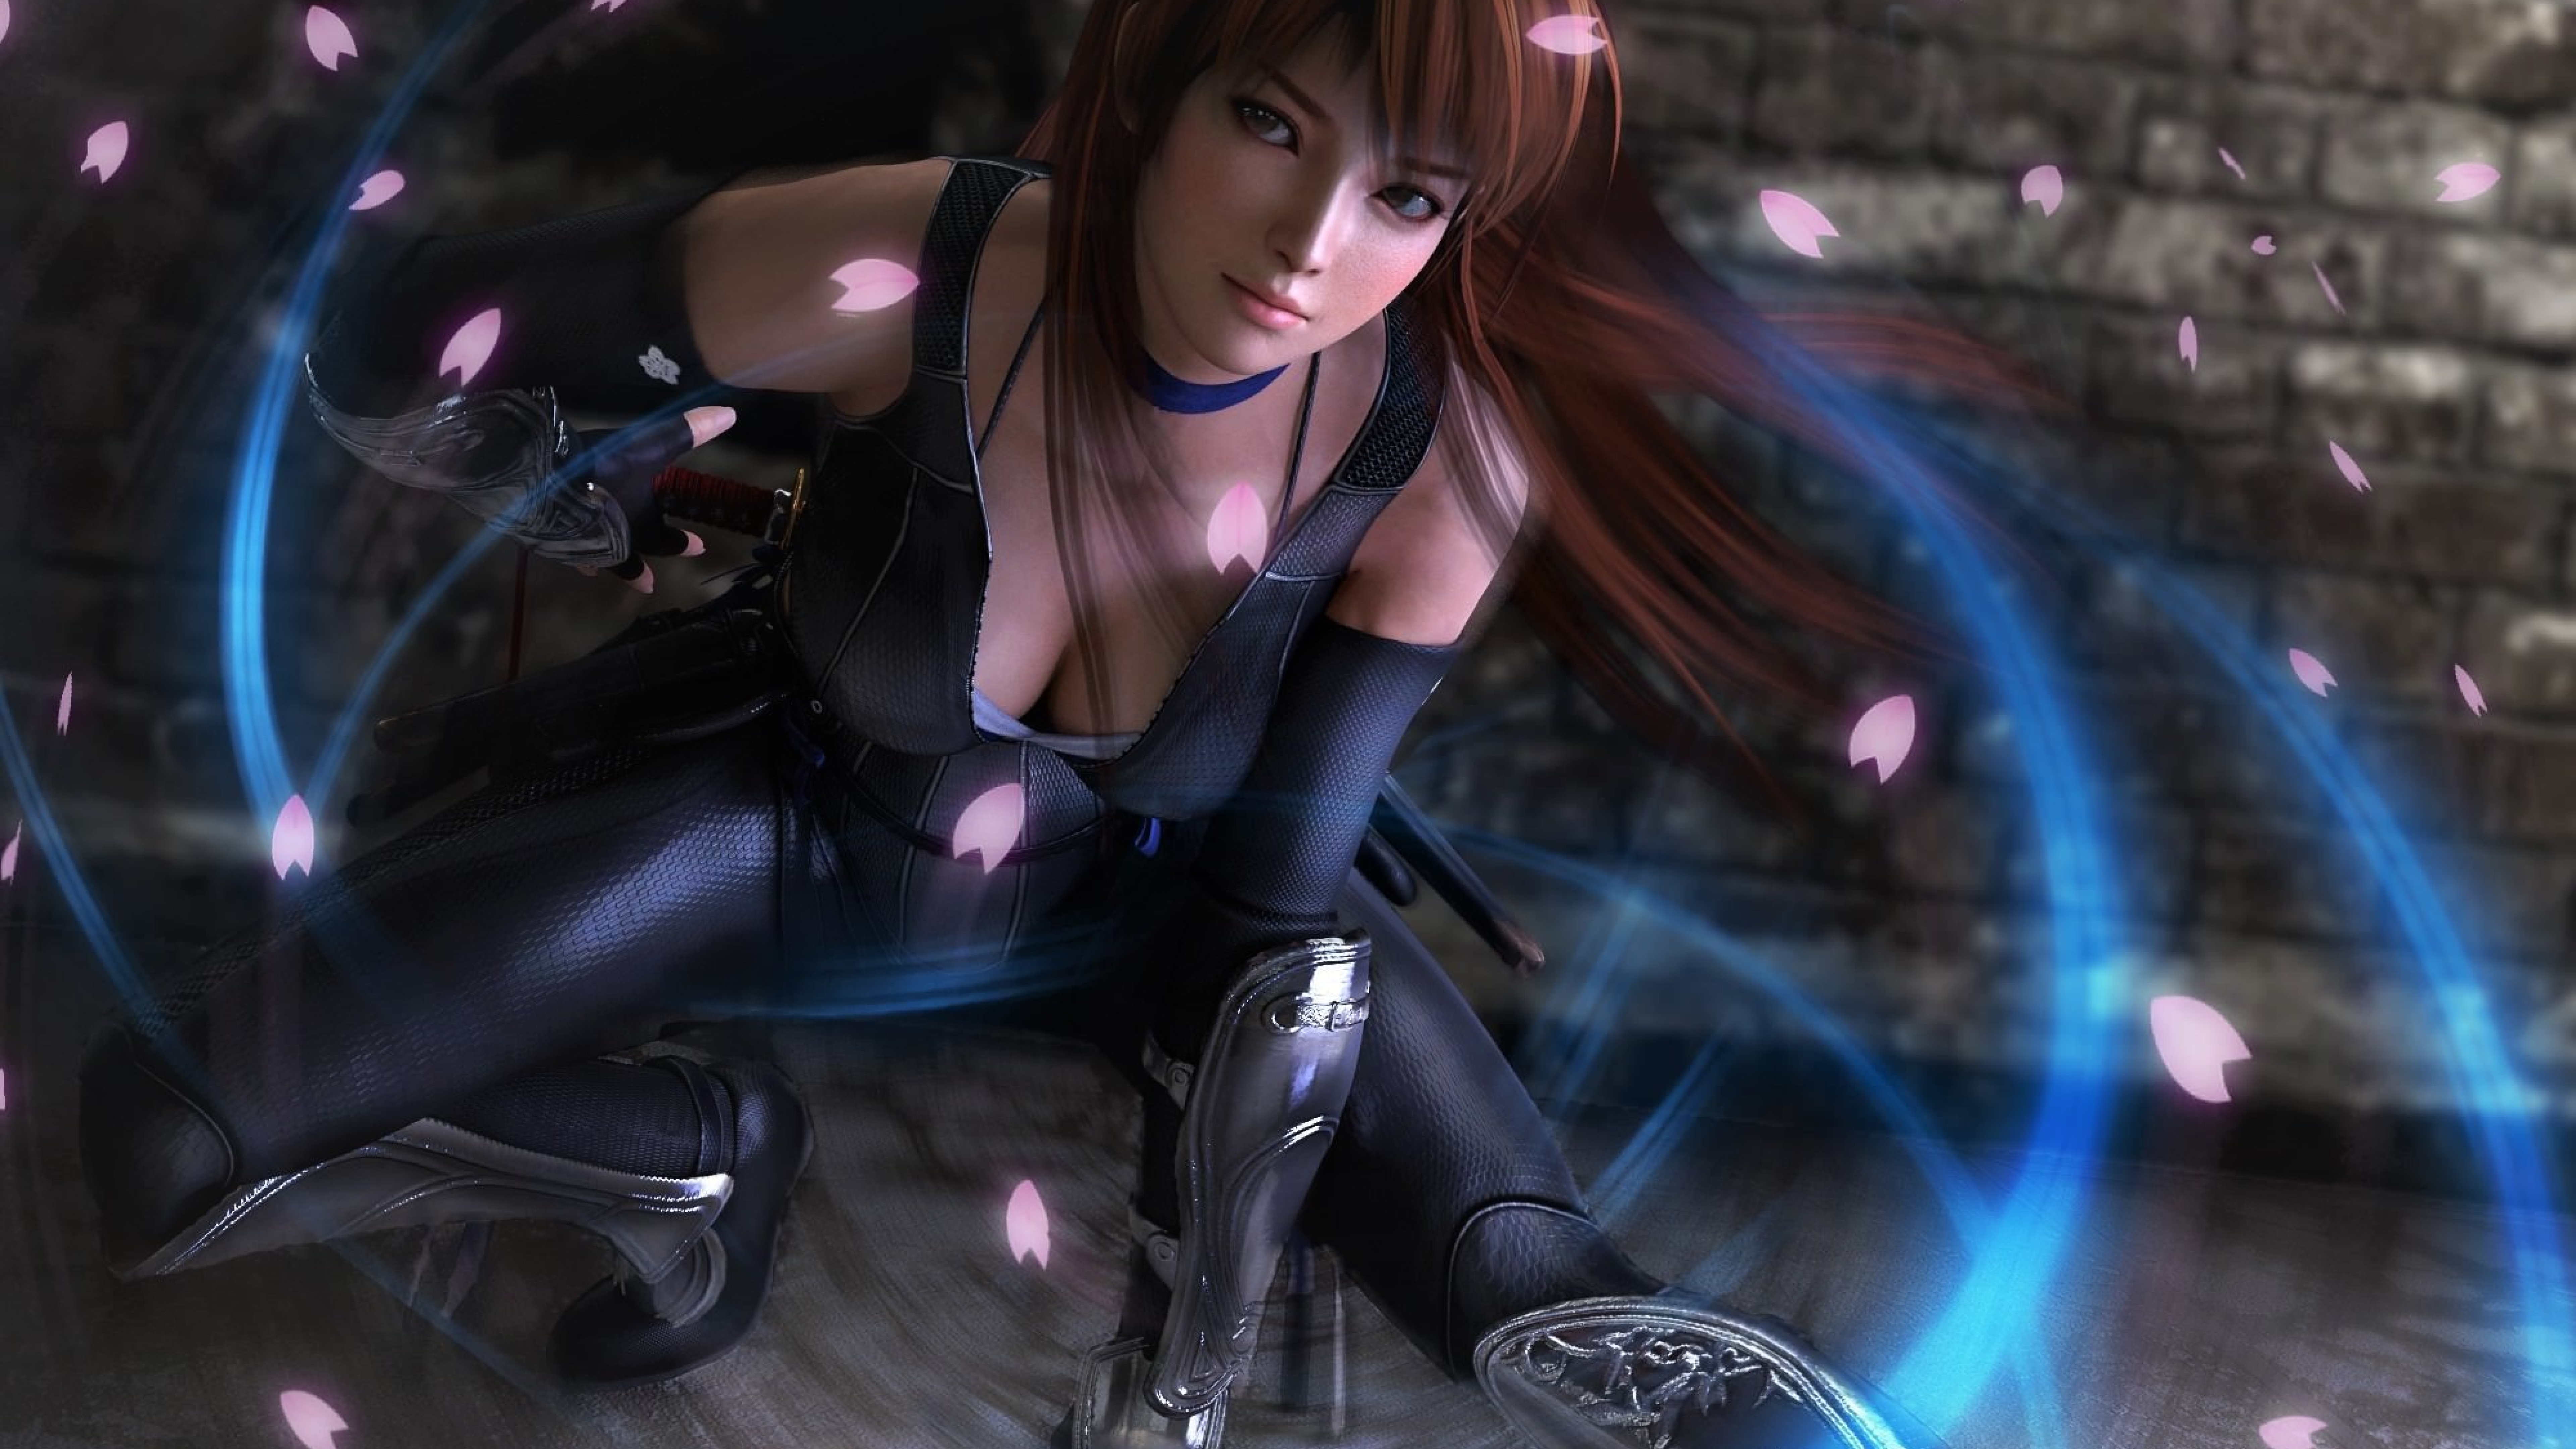 Game Kasumi dead or alive Silk poster 14 X 24 inch wallpaper 